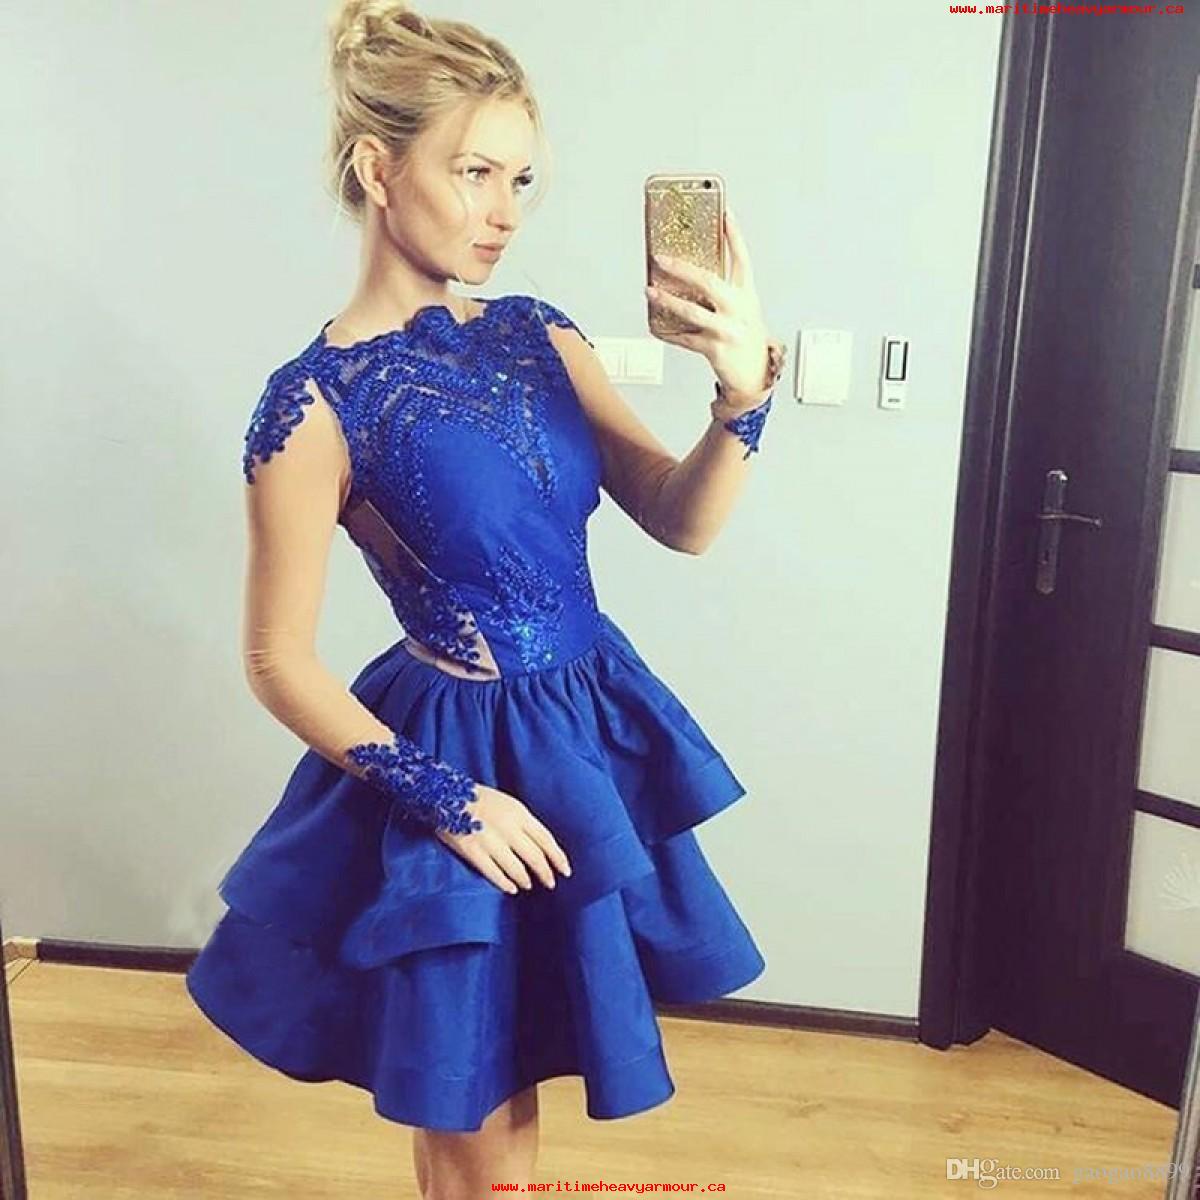 Jewel Long Sleeve Appliques Satin Homecoming Dresses Royal Blue Carissa Tiered Lace Short